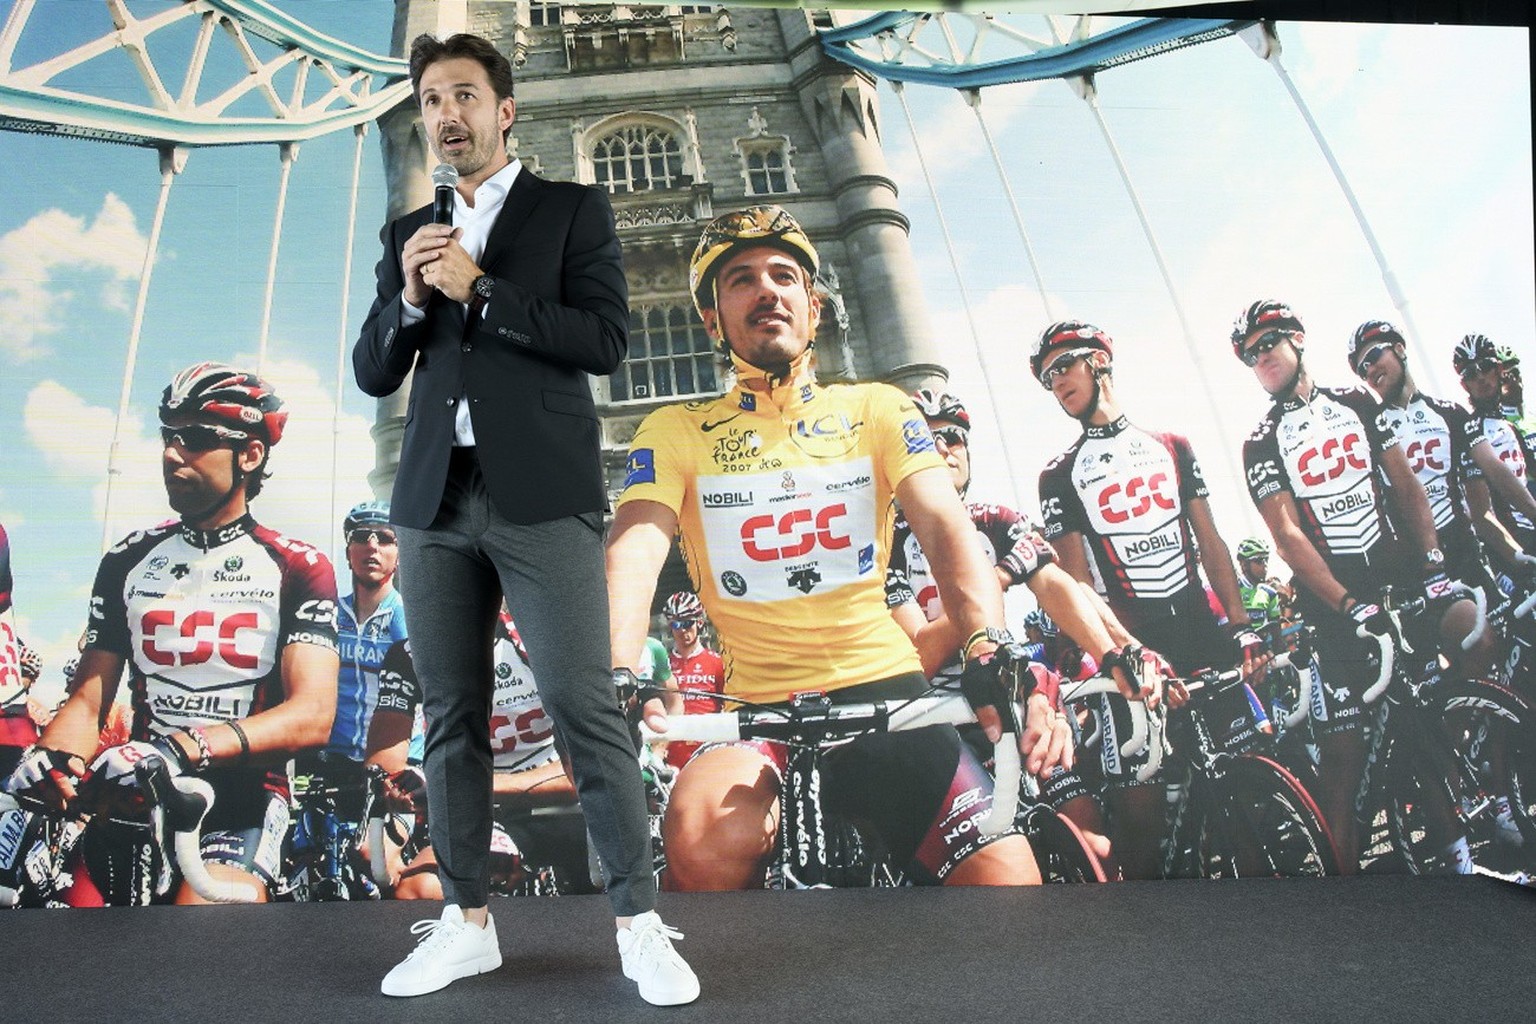 Former Swiss professional road racing cyclist Fabian Cancellara speaks during a press conference on his new cycling team &quot;Tudor Pro Cycling Team&quot; on the sideline of the 75th Tour de Romandie ...